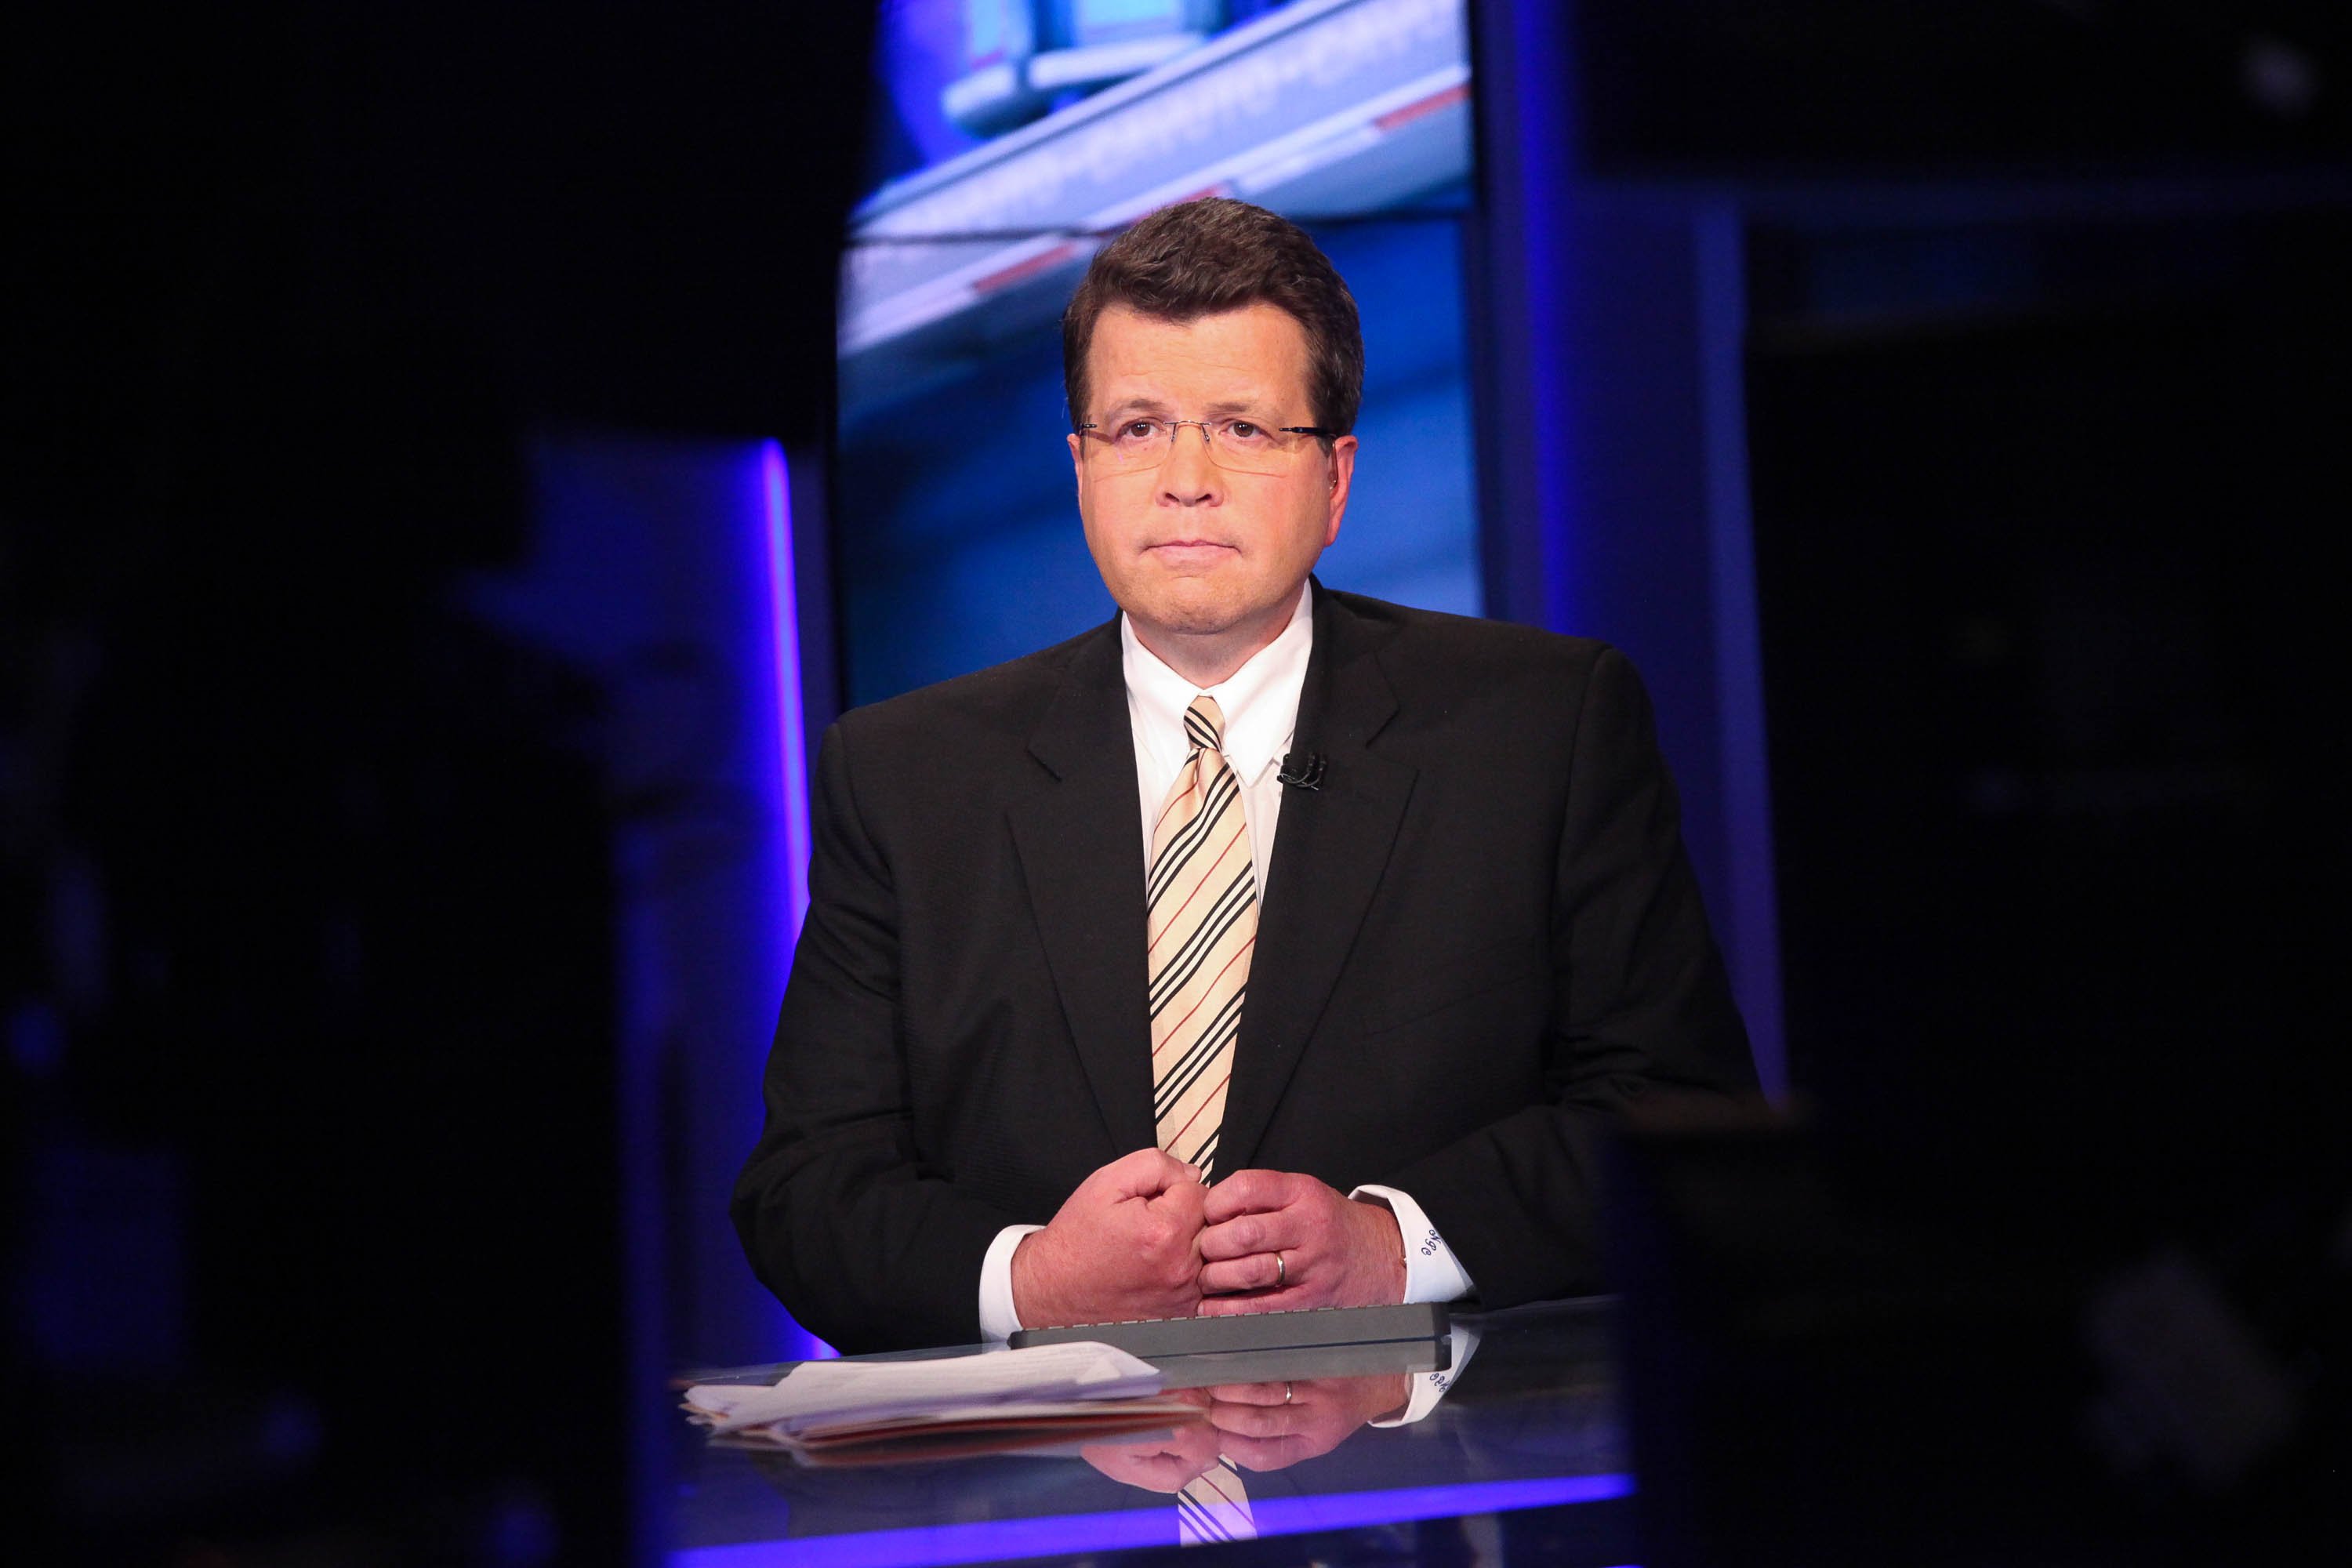 Neil Cavuto hosts "Cavuto" on FOX Business Network at FOX Studios on September 23, 2014 in New York City. | Photo: Getty Images